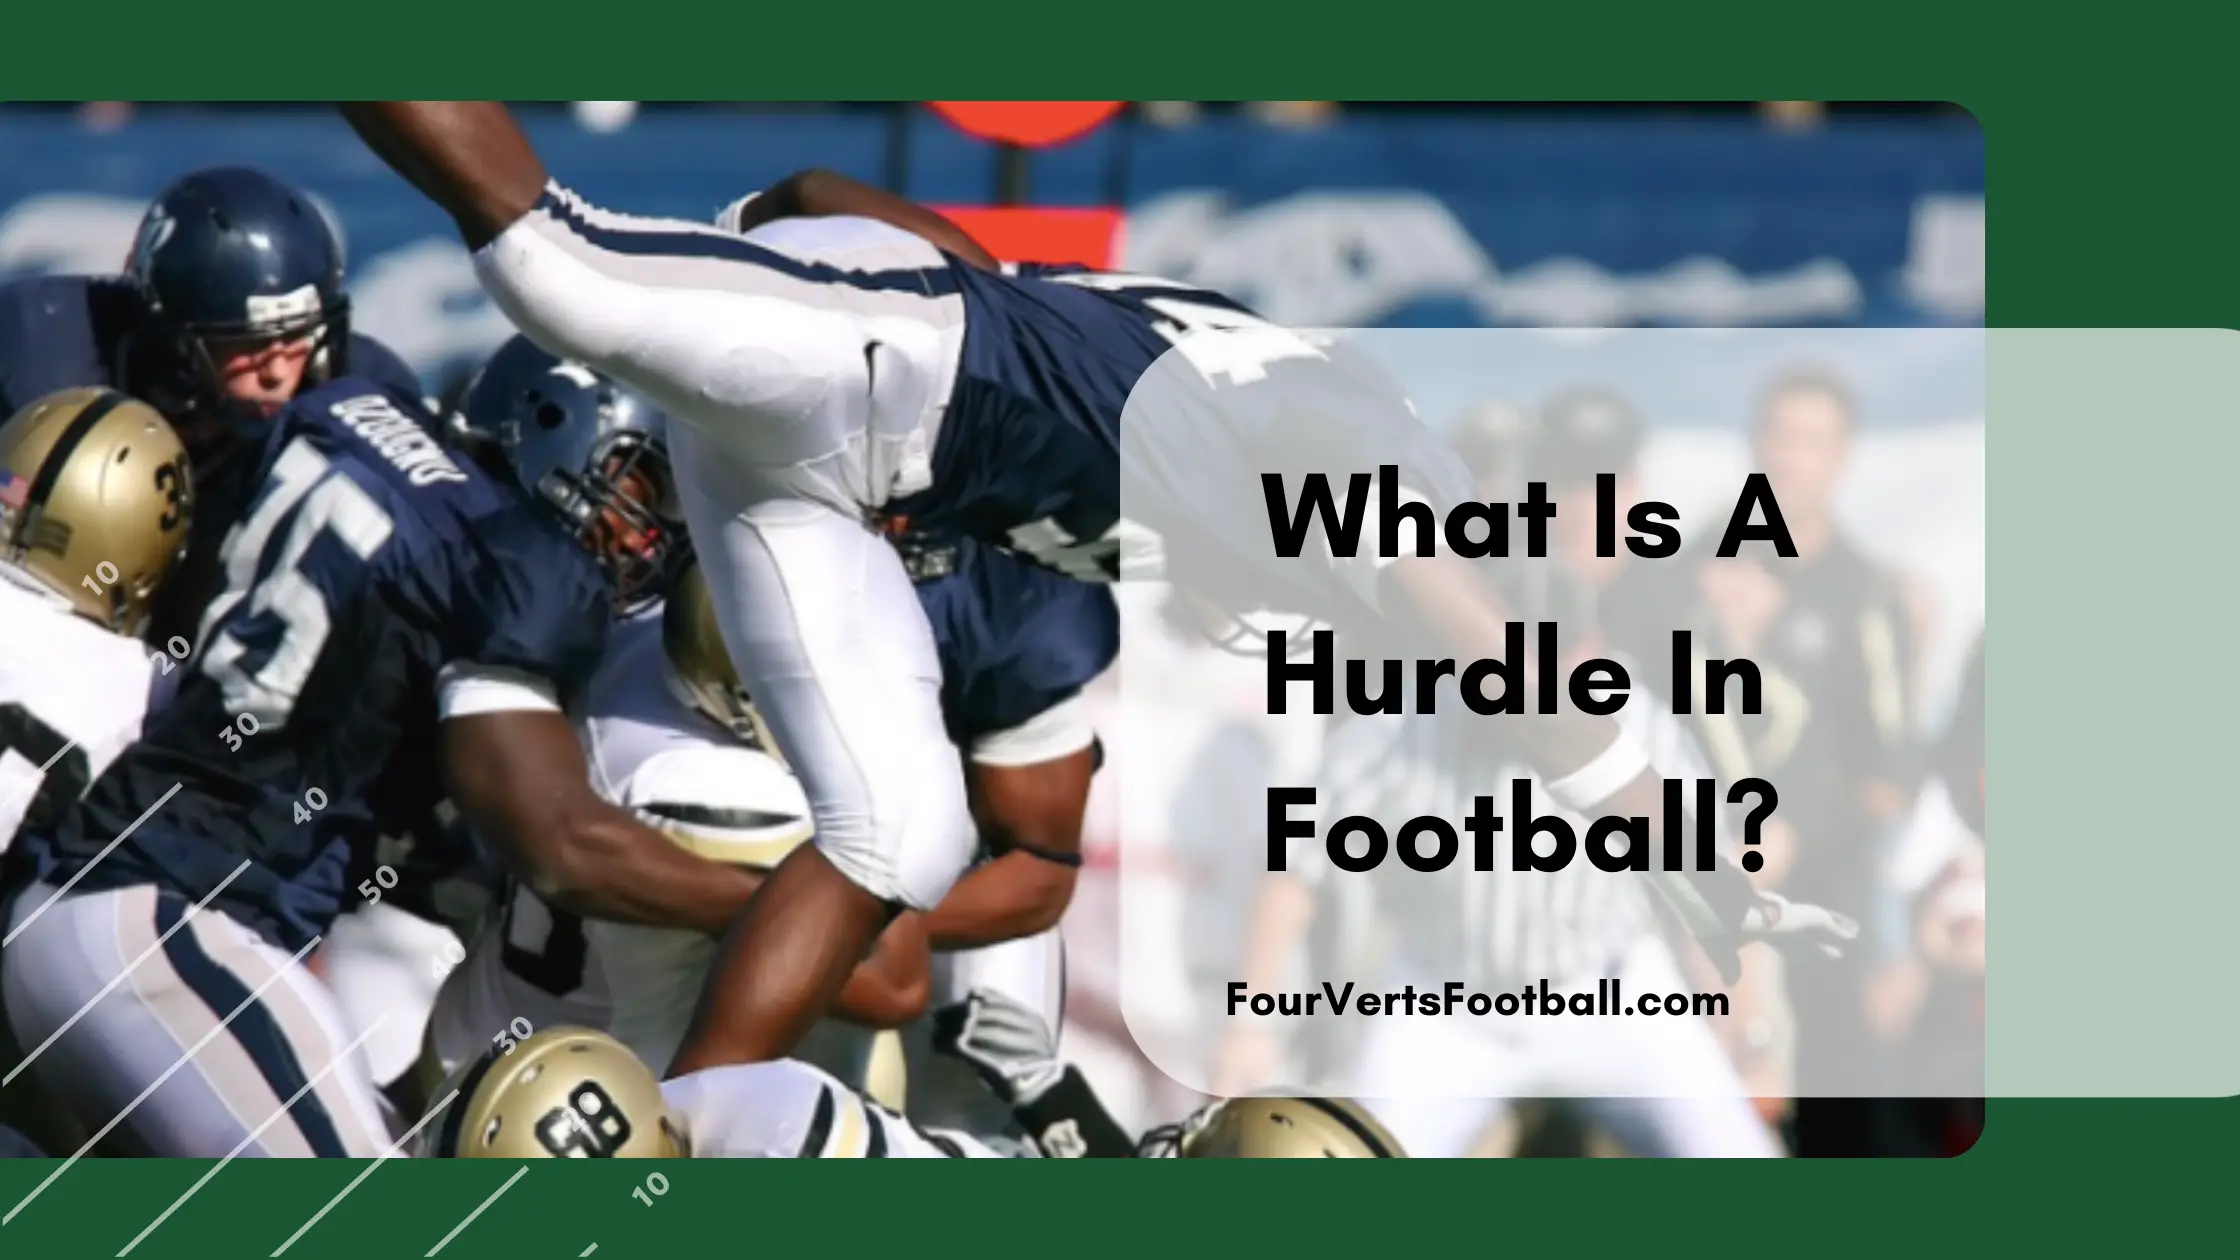 What Is A Hurdle In Football?